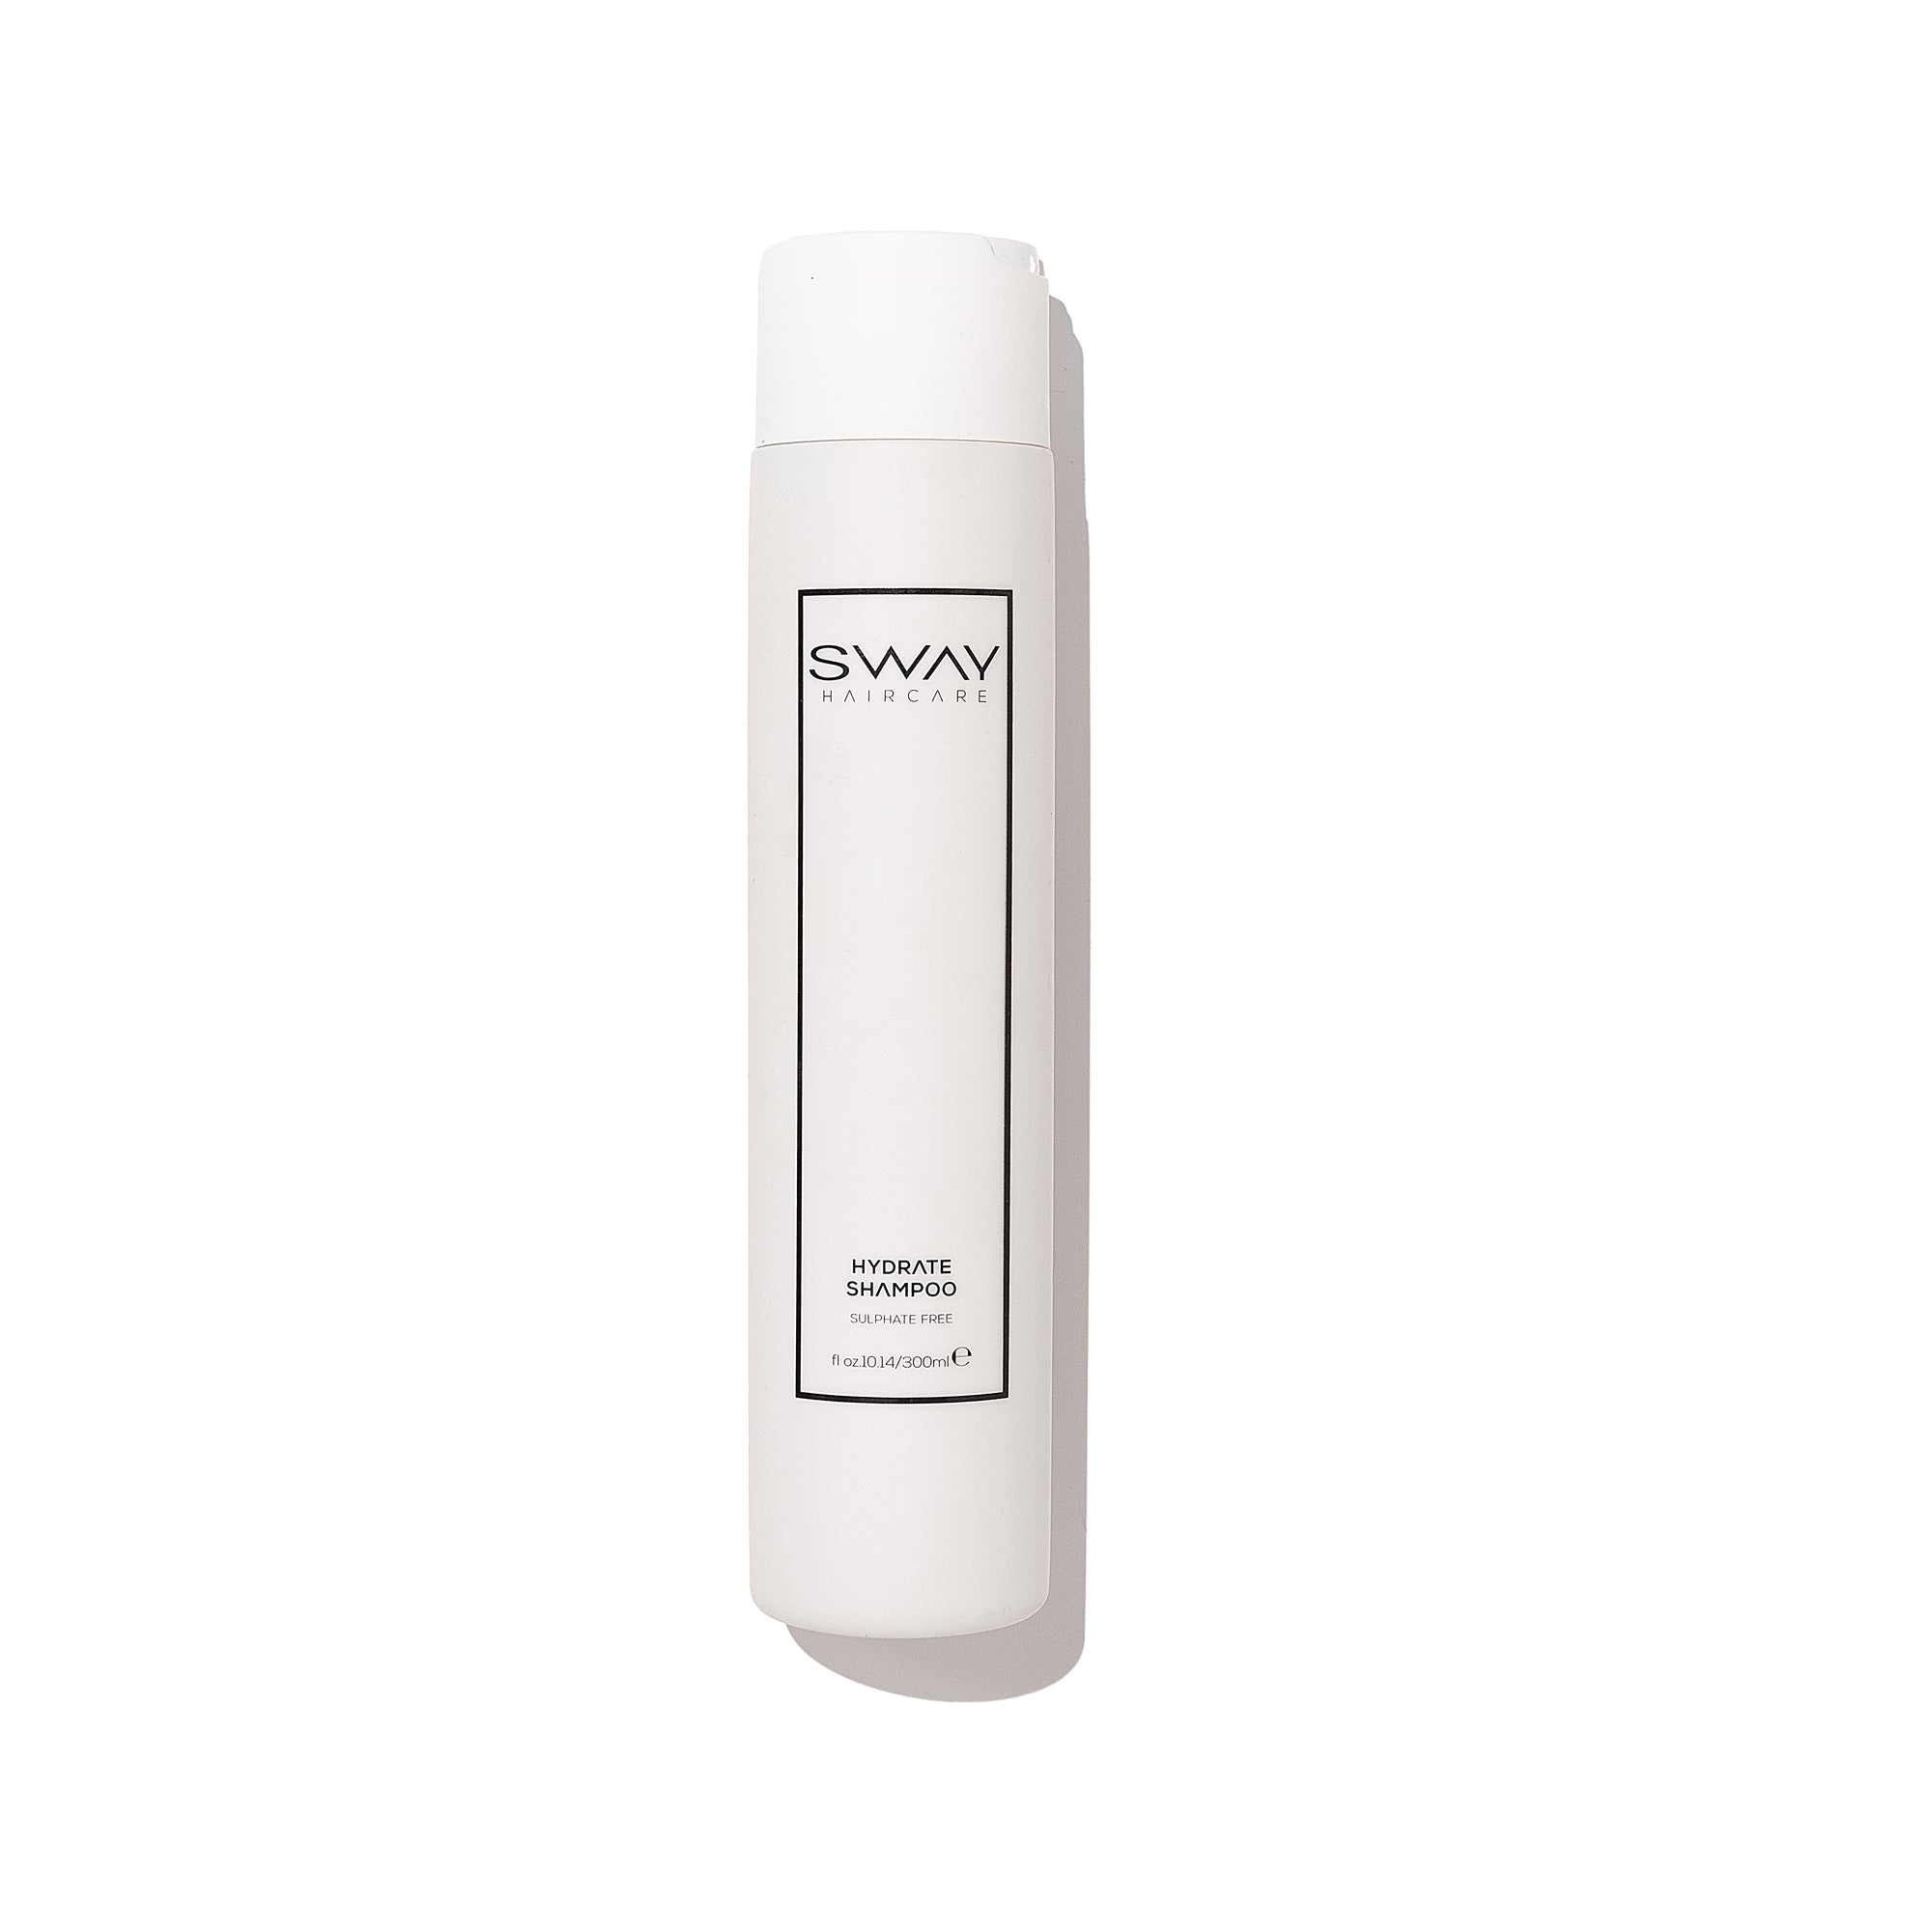 SWAY Hydrate Shampoo - Sulphate and paraben-free formula with argan and macadamia oils for nourished, manageable hair and extensions